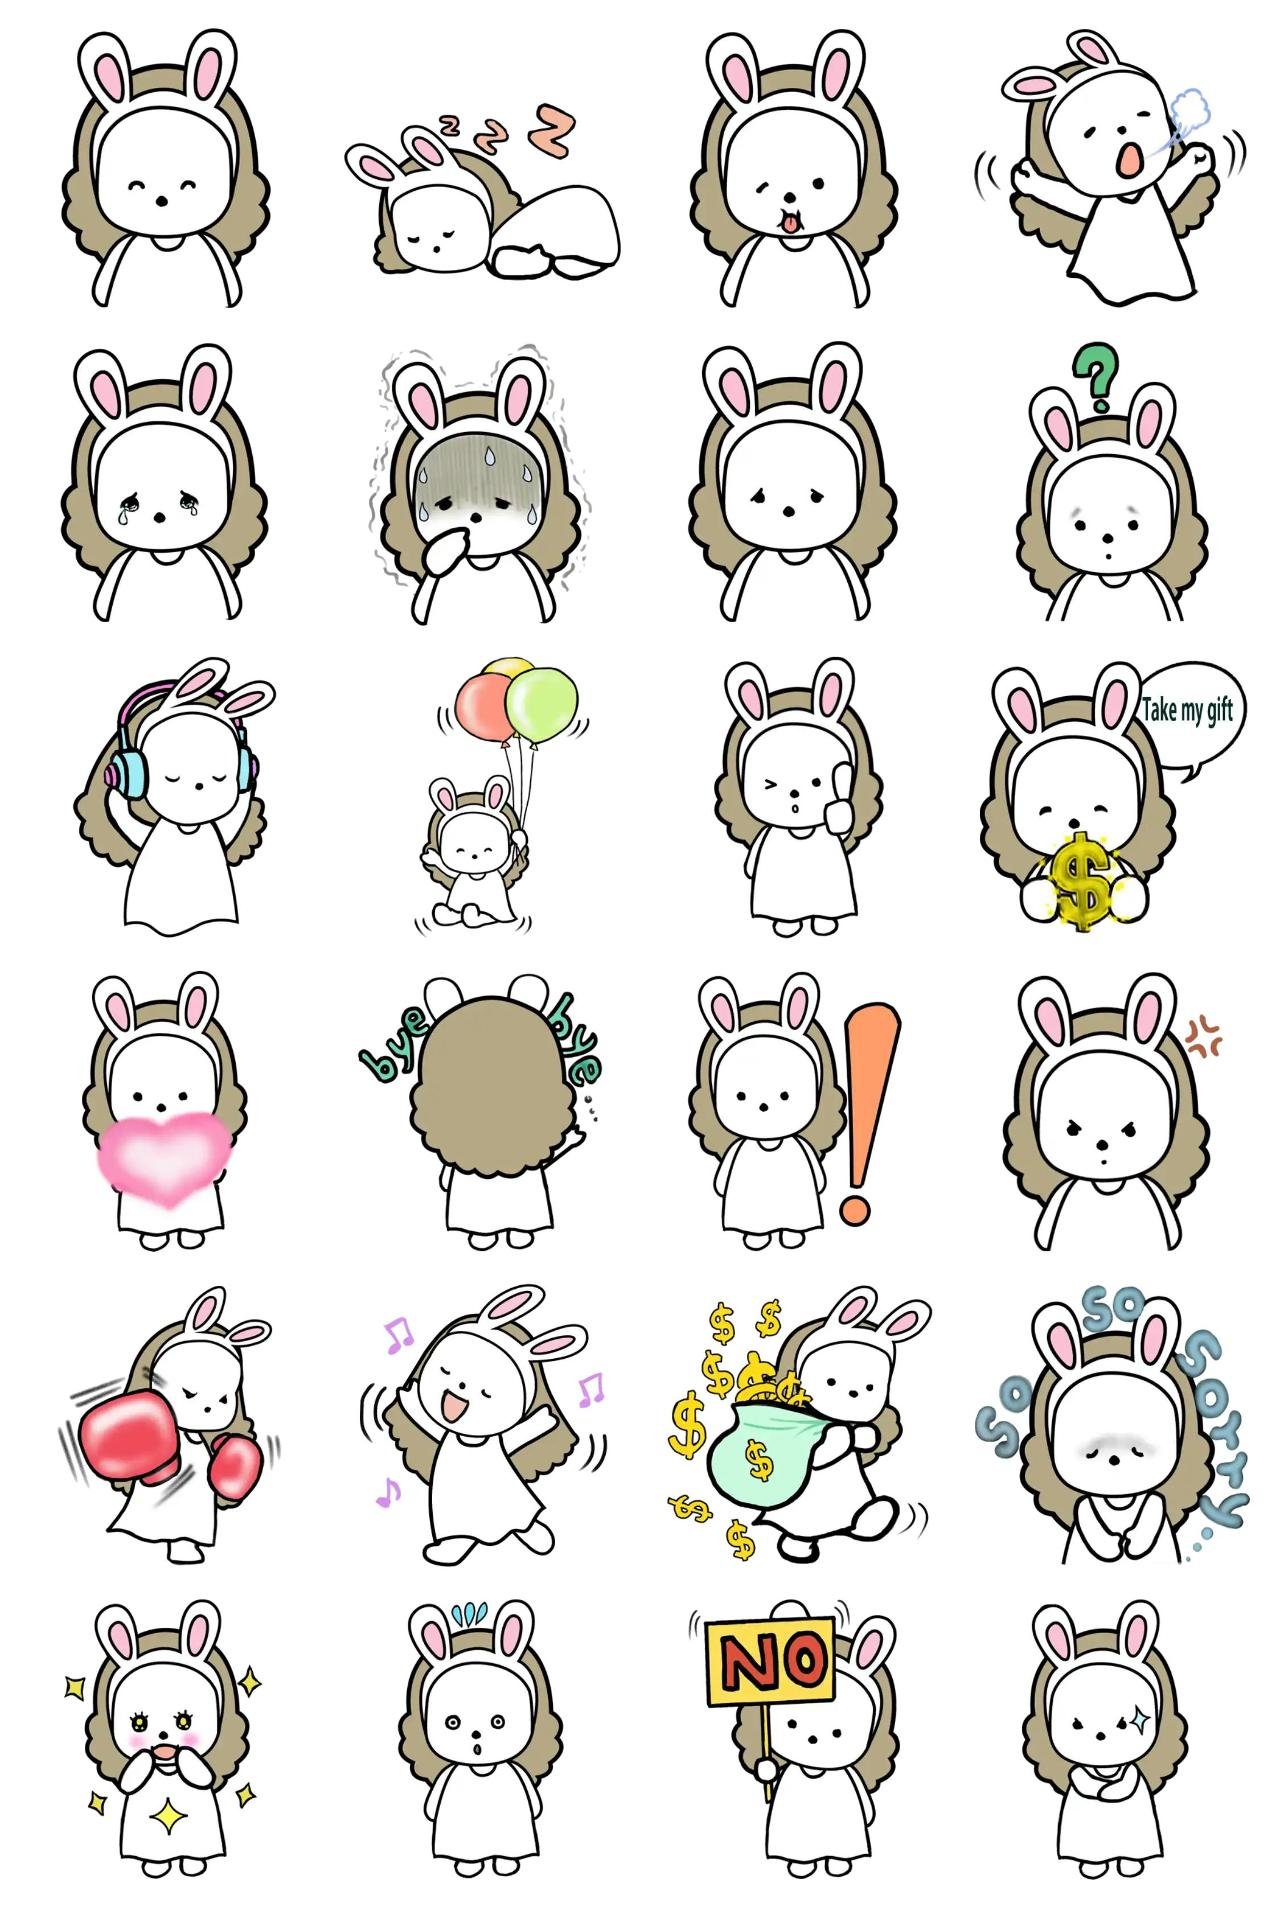 Bobi the Angel Animals sticker pack for Whatsapp, Telegram, Signal, and others chatting and message apps